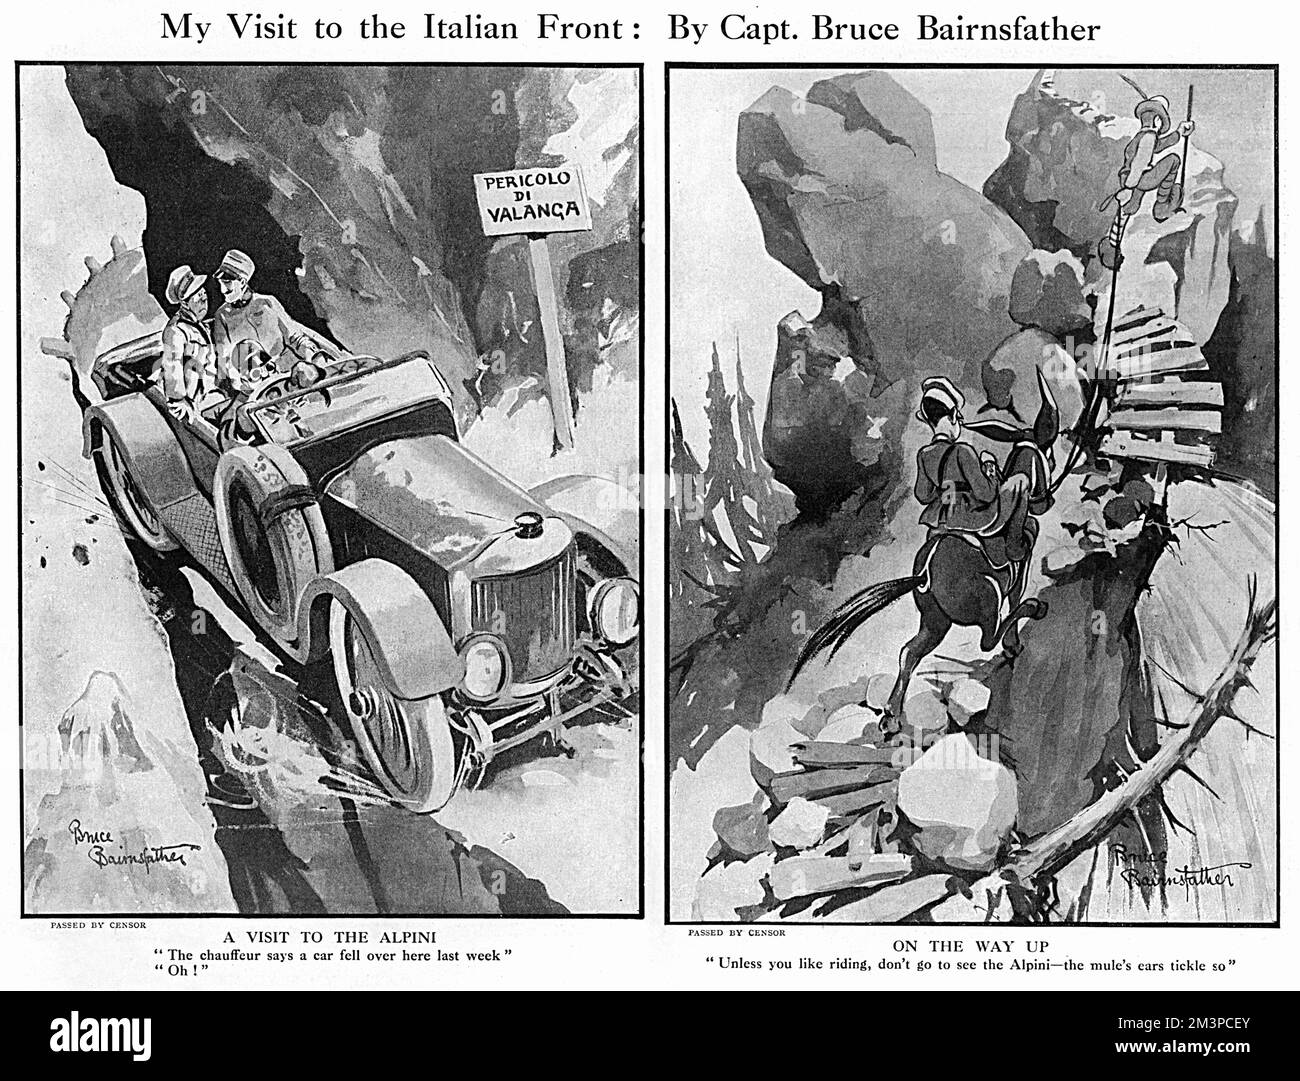 (Left picture): A Visit to the Alpini:  &quot;The chauffeur says a car fell over here last week&quot;  &quot;Oh!&quot;  Autobiographical cartoon from Captain Bruce Bairnsfather in The Bystander documenting his experiences during a trip to the Italian Front in 1918.  The picture on the right, showing a precarious mountain journey is entitled, 'On the Way Up - Unless you like riding, don't go and see the Alpini - the mule's ears tickle so.&quot;'     Date: 1918 Stock Photo